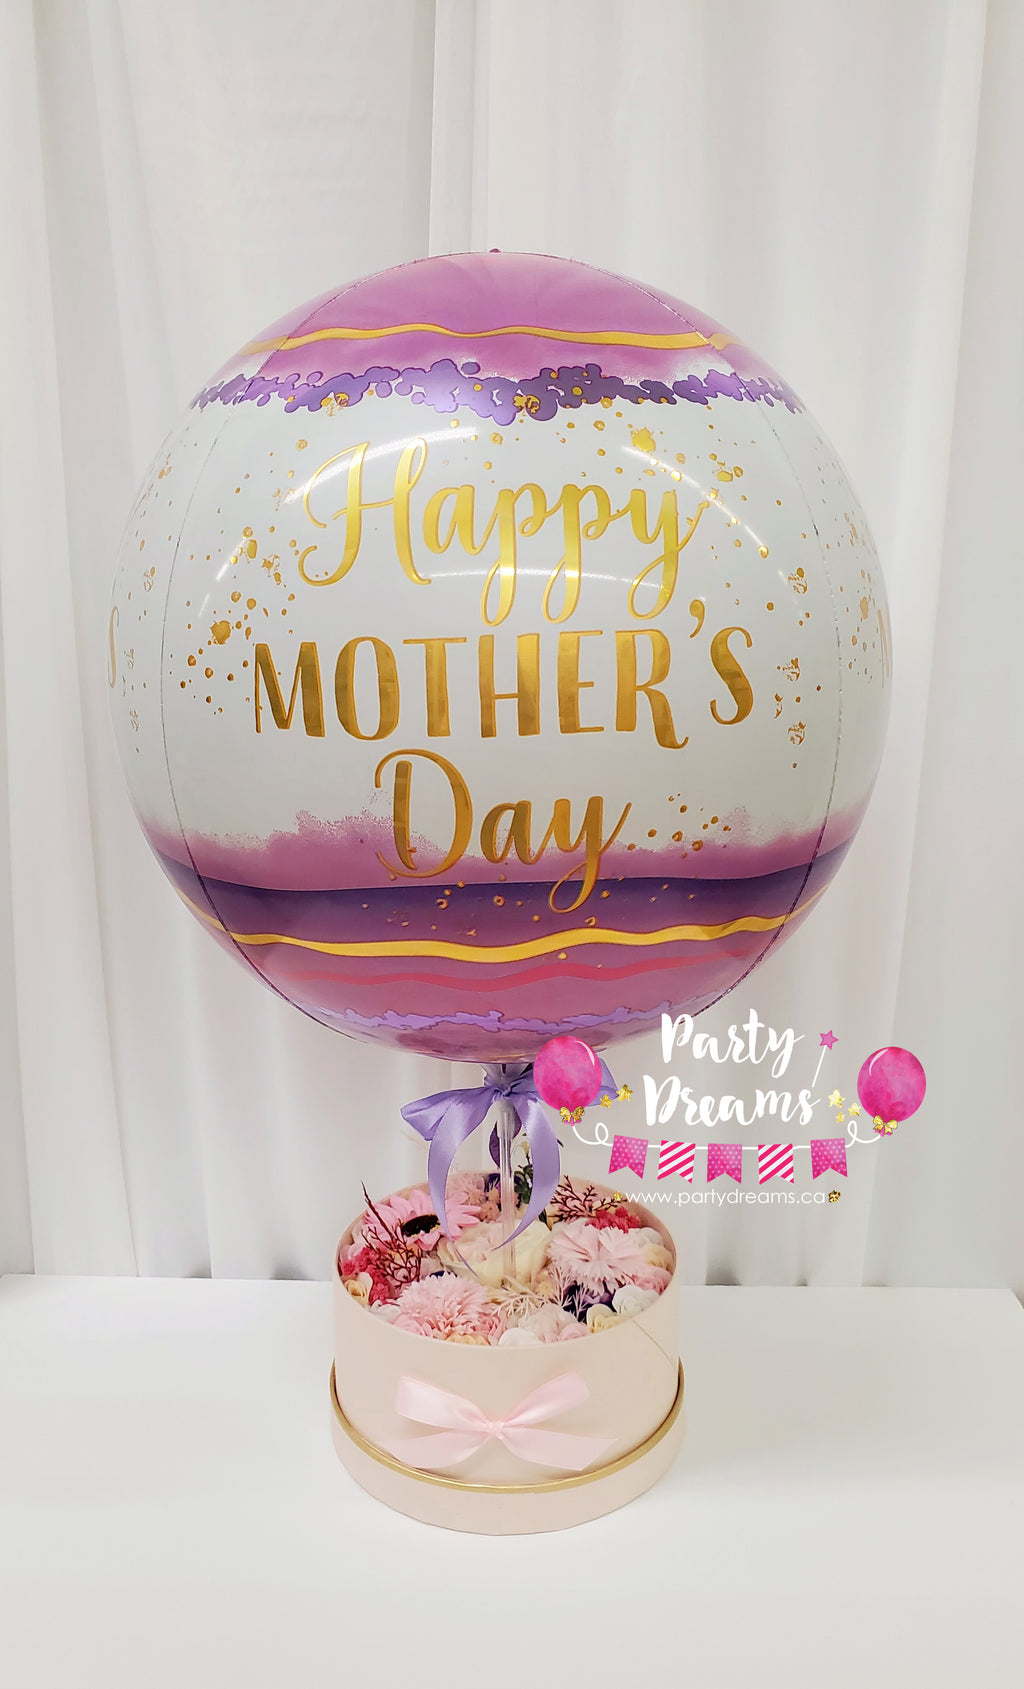 Mother's Day Balloon Soap Flower Box Set - C